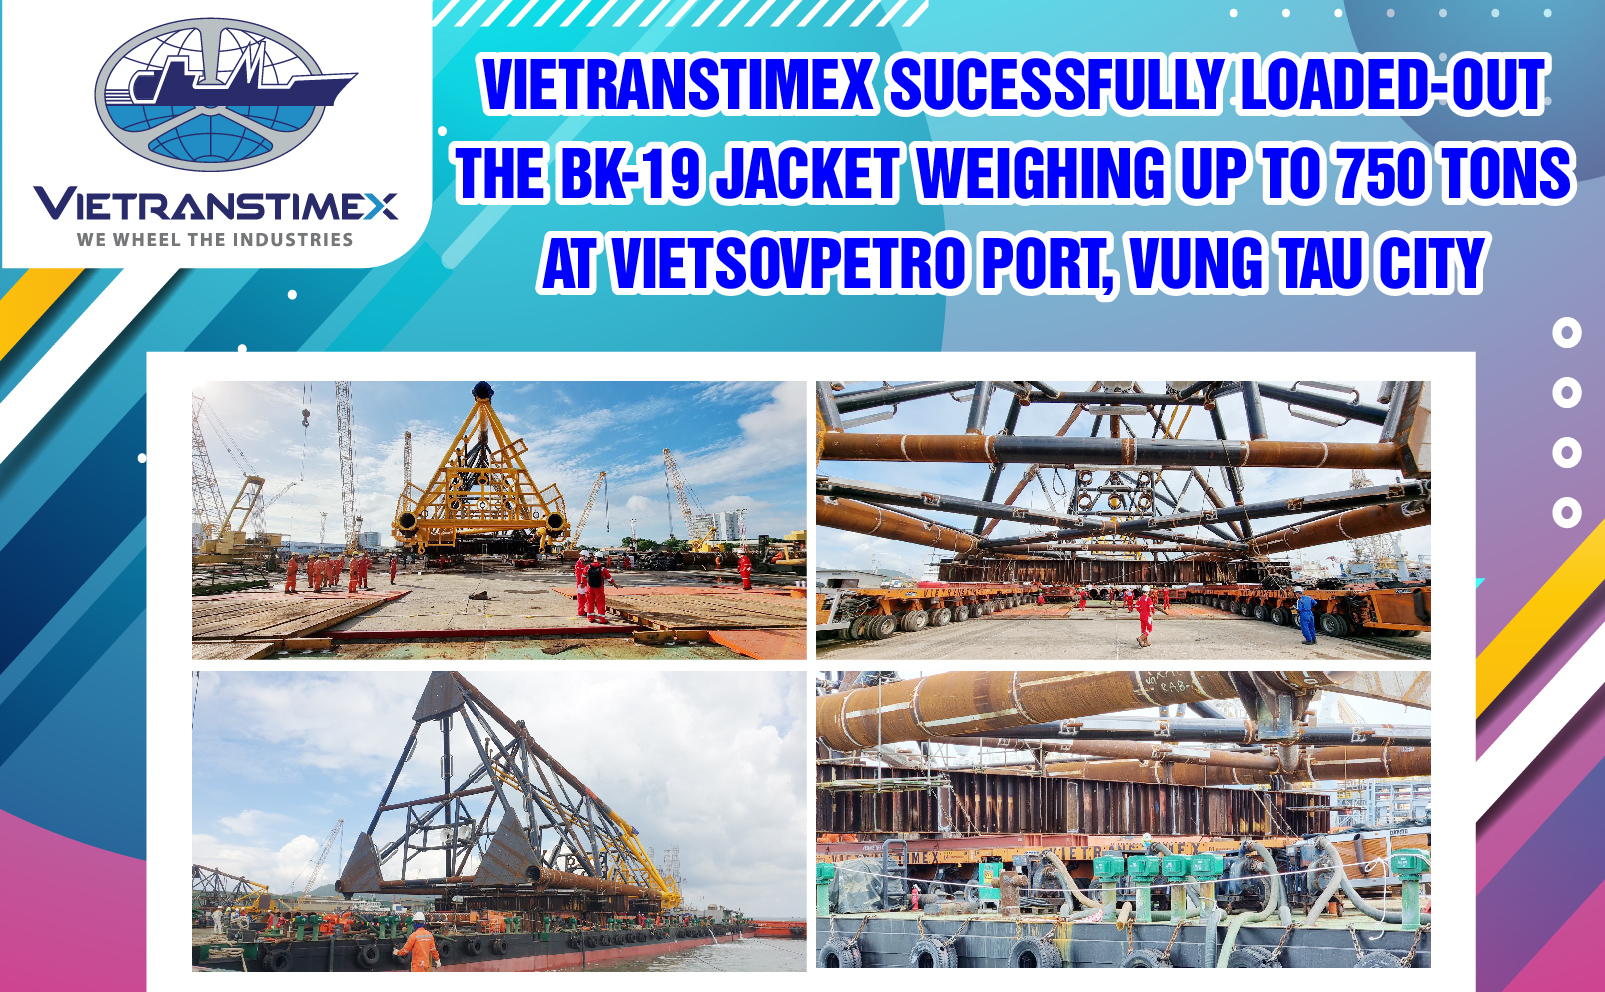 Vietranstimex finished Load-out The BK-19 Jacket, 750 Tons (June 2021)